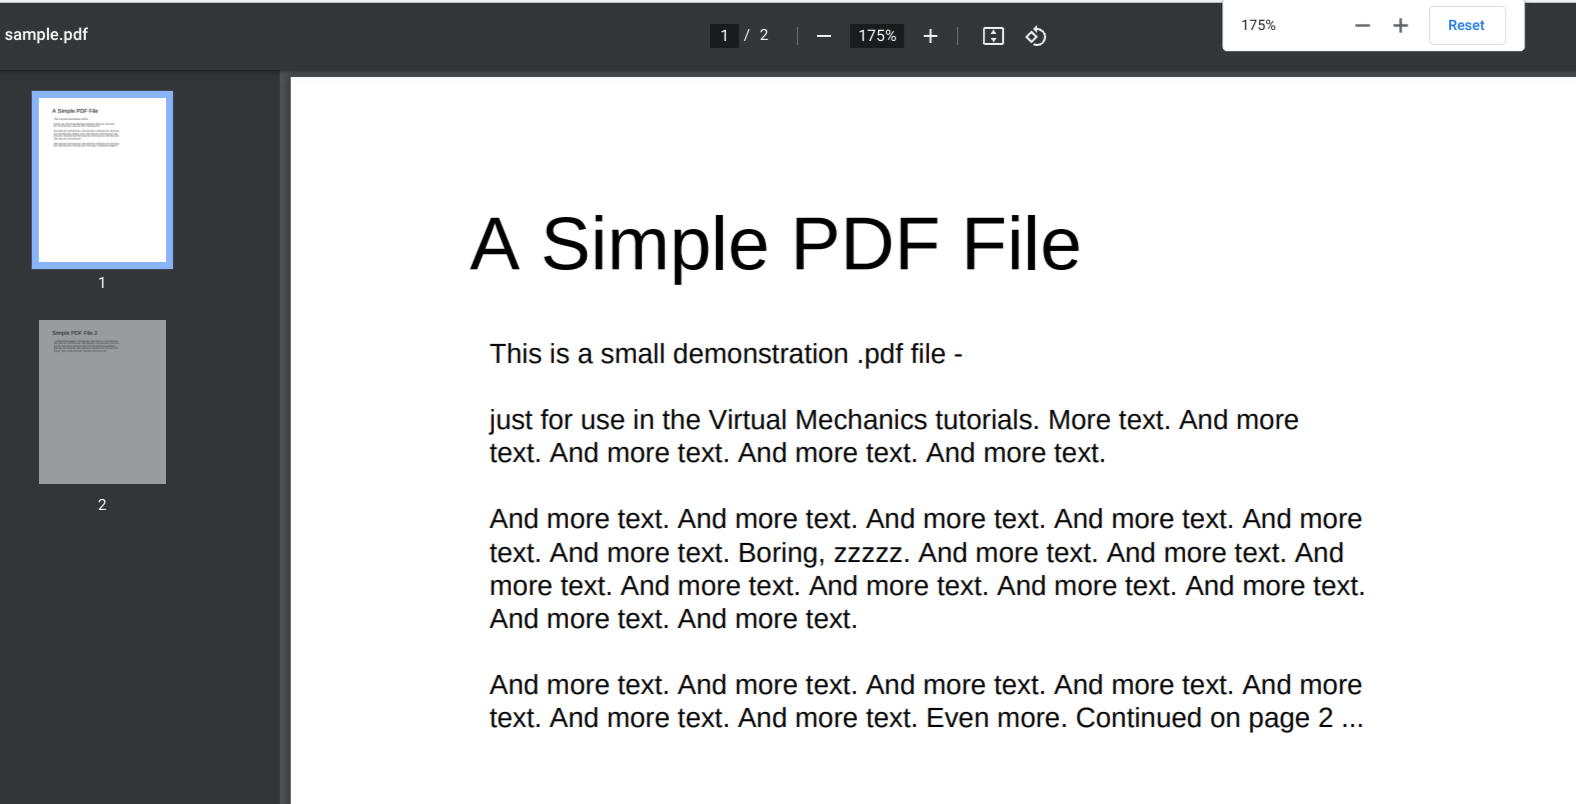 Zooming in on the PDF